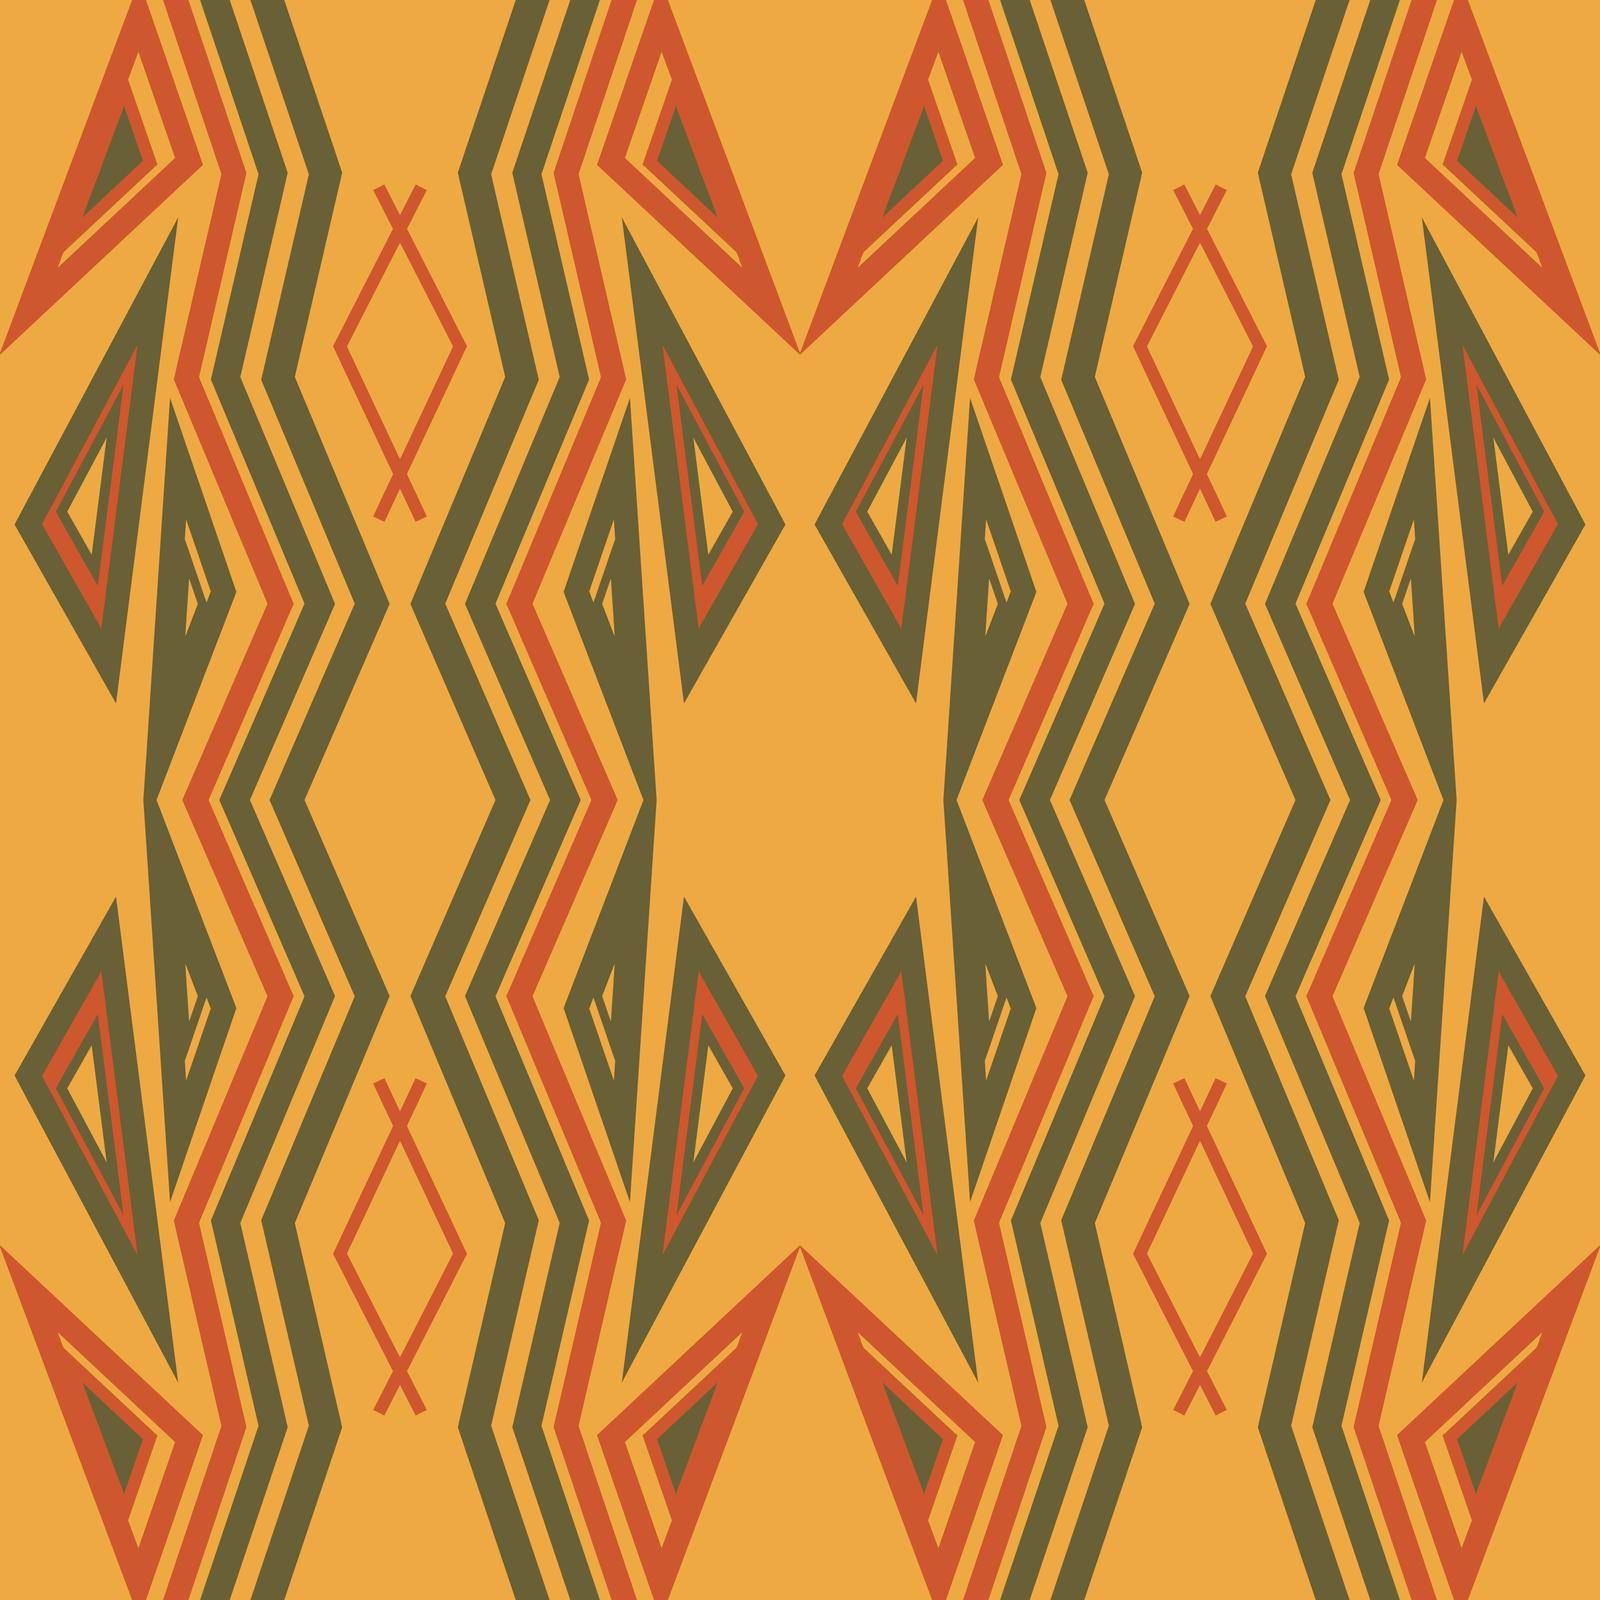 Abstract pattern geometric backgrounds  by eskimos